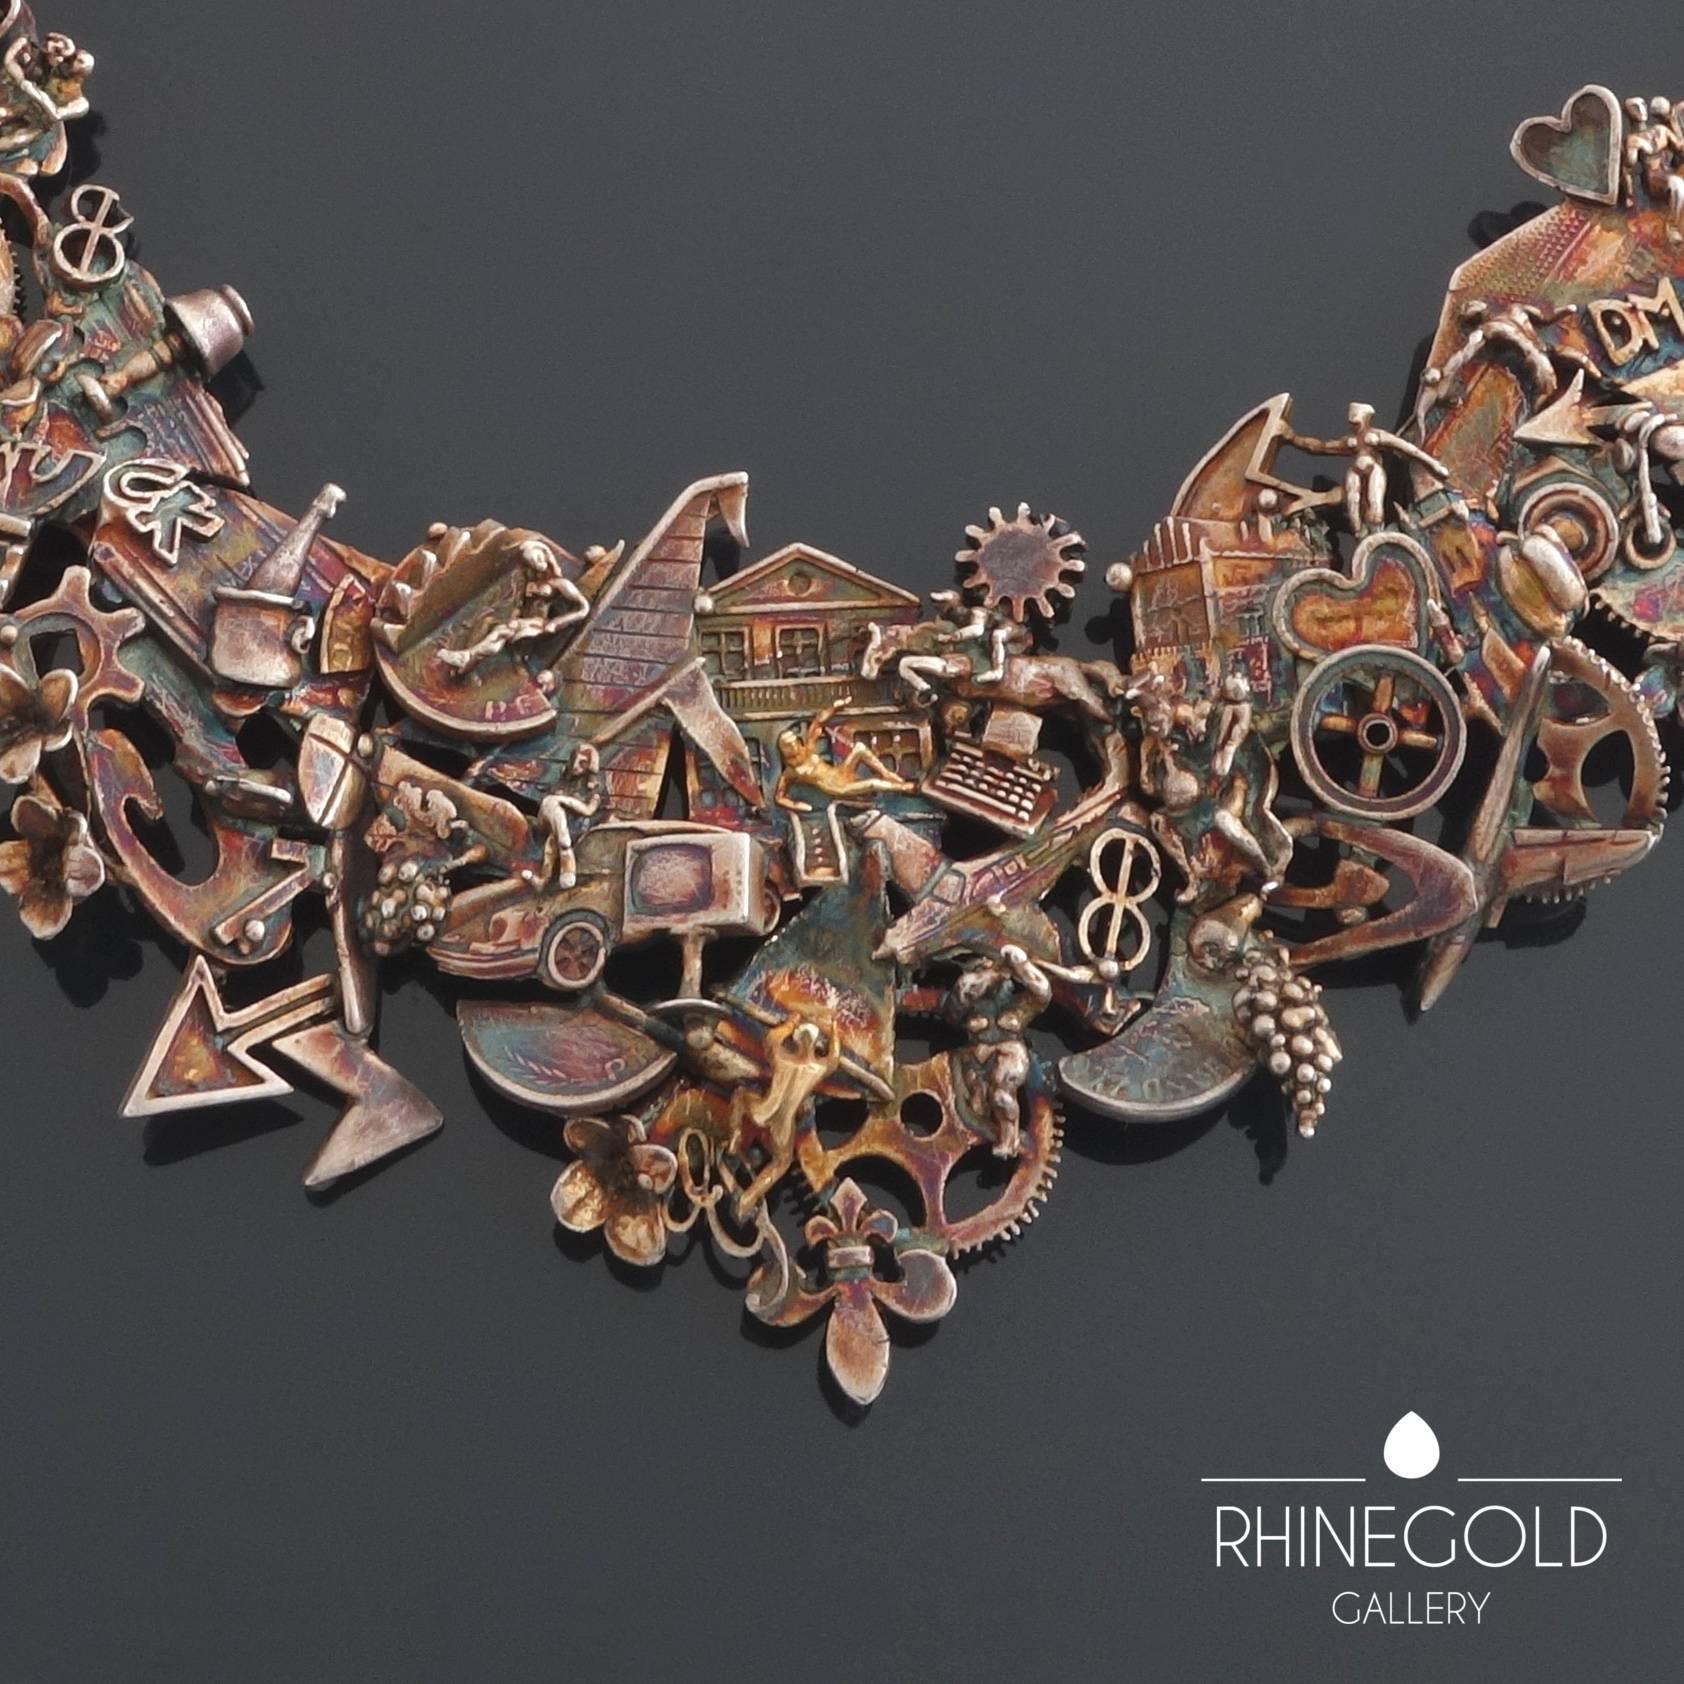 Ehinger-Schwarz: Figural Modernist Necklace of Patinated Silver 
Patinated sterling silver
Length 40.5 cm (approx. 16") , Width 5.6 to 0.8 cm (approx. 2 3/16" to 5/16")
Marks: silver content mark ‘925‘, maker’s mark
Germany,